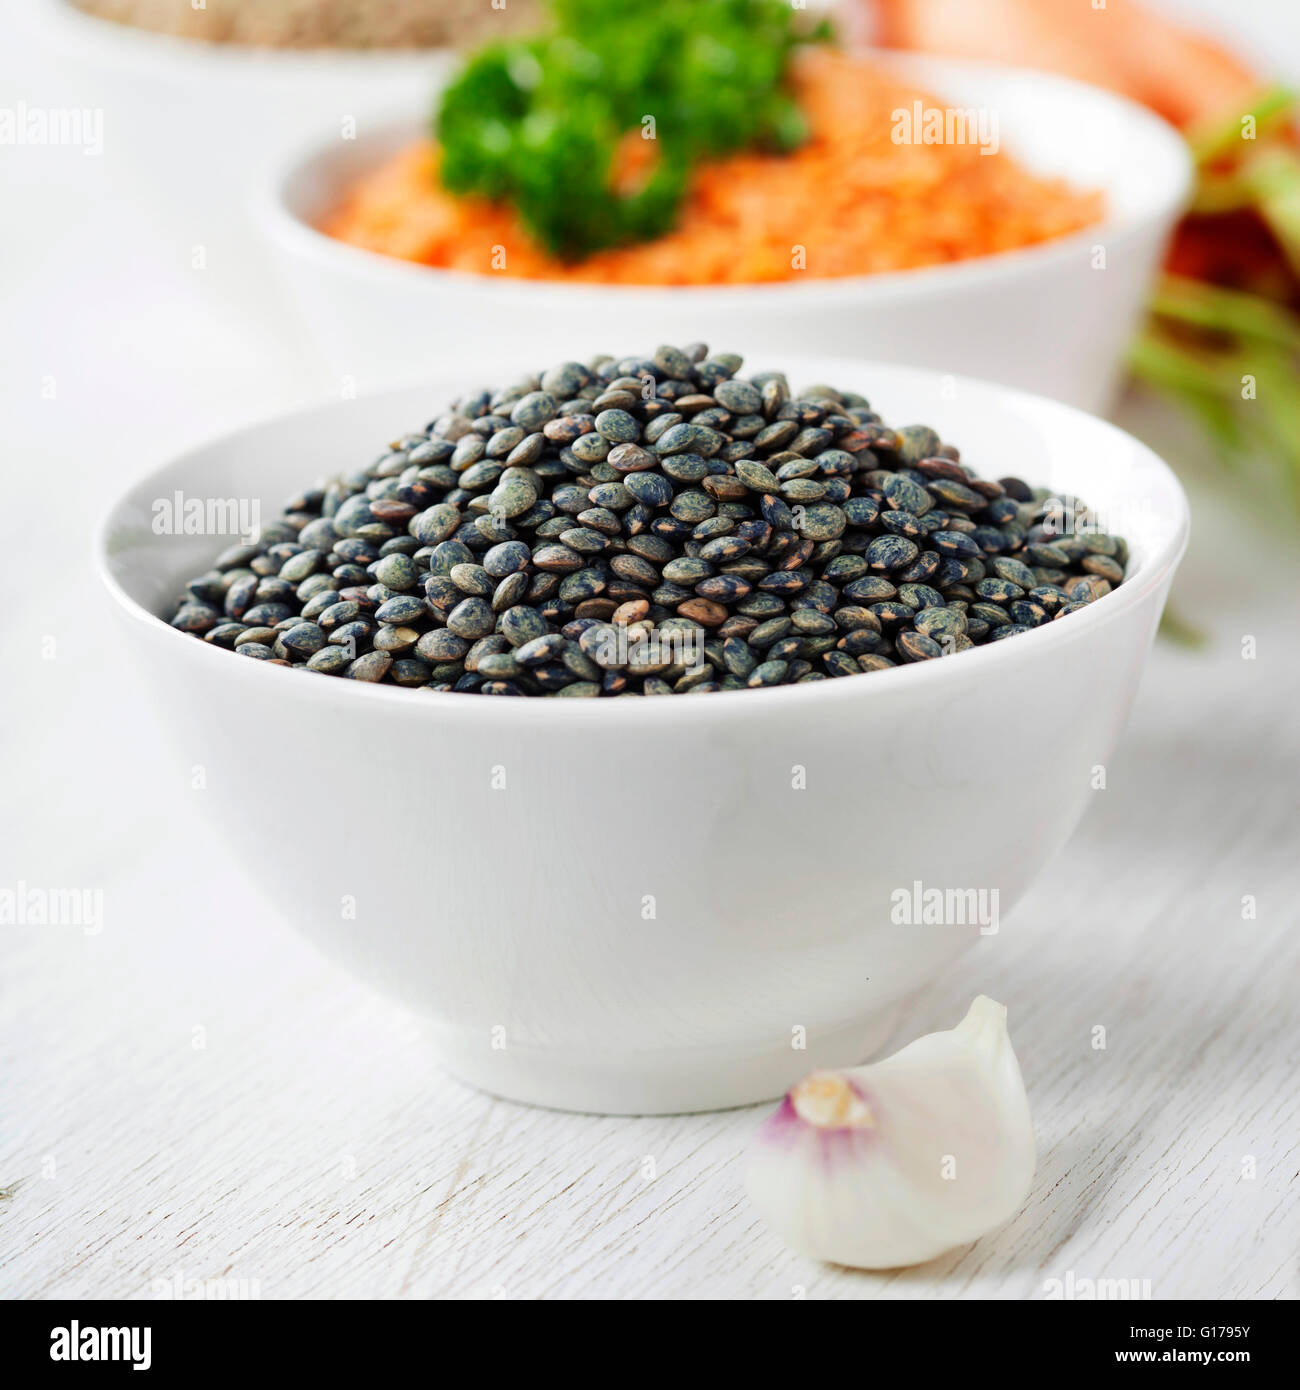 Bowls of assorted dried lentils with vegetables over white Stock Photo